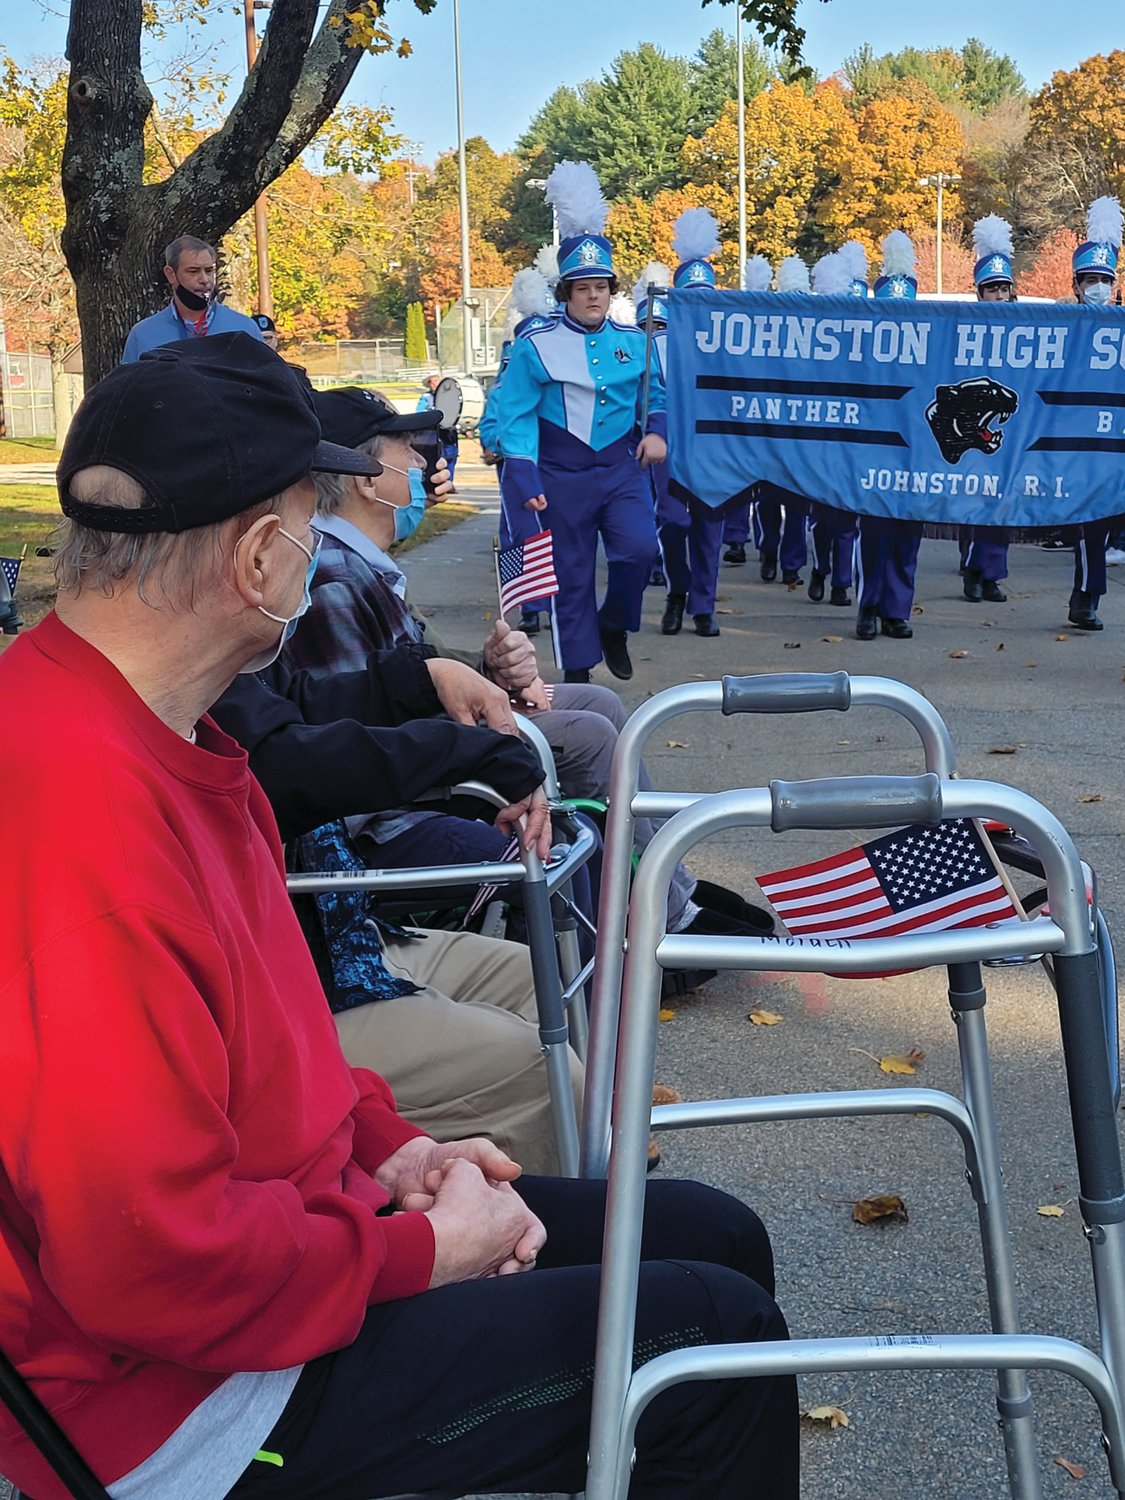 SKY SOLDIER: Veteran George M. was driven to Johnston Memorial Park on Wednesday for a Veterans Day Recognition Ceremony. He had a prime seat for the Johnston High School Marching Band performance.